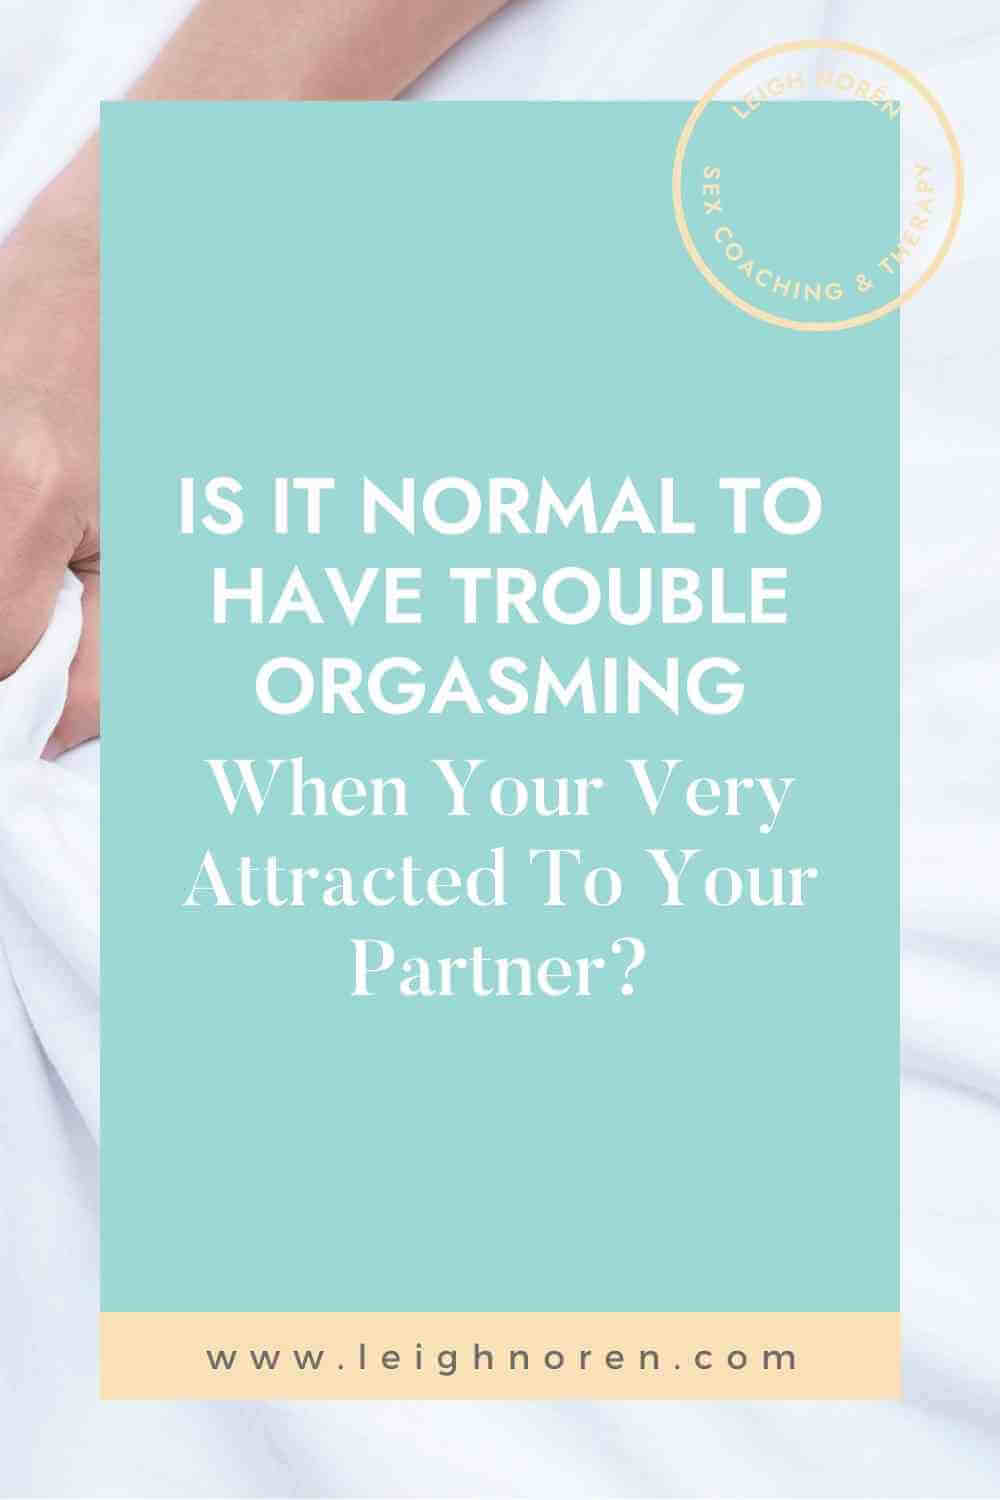 Is It Normal To Have Trouble Orgasming When You're Very Attracted To Your Partner?